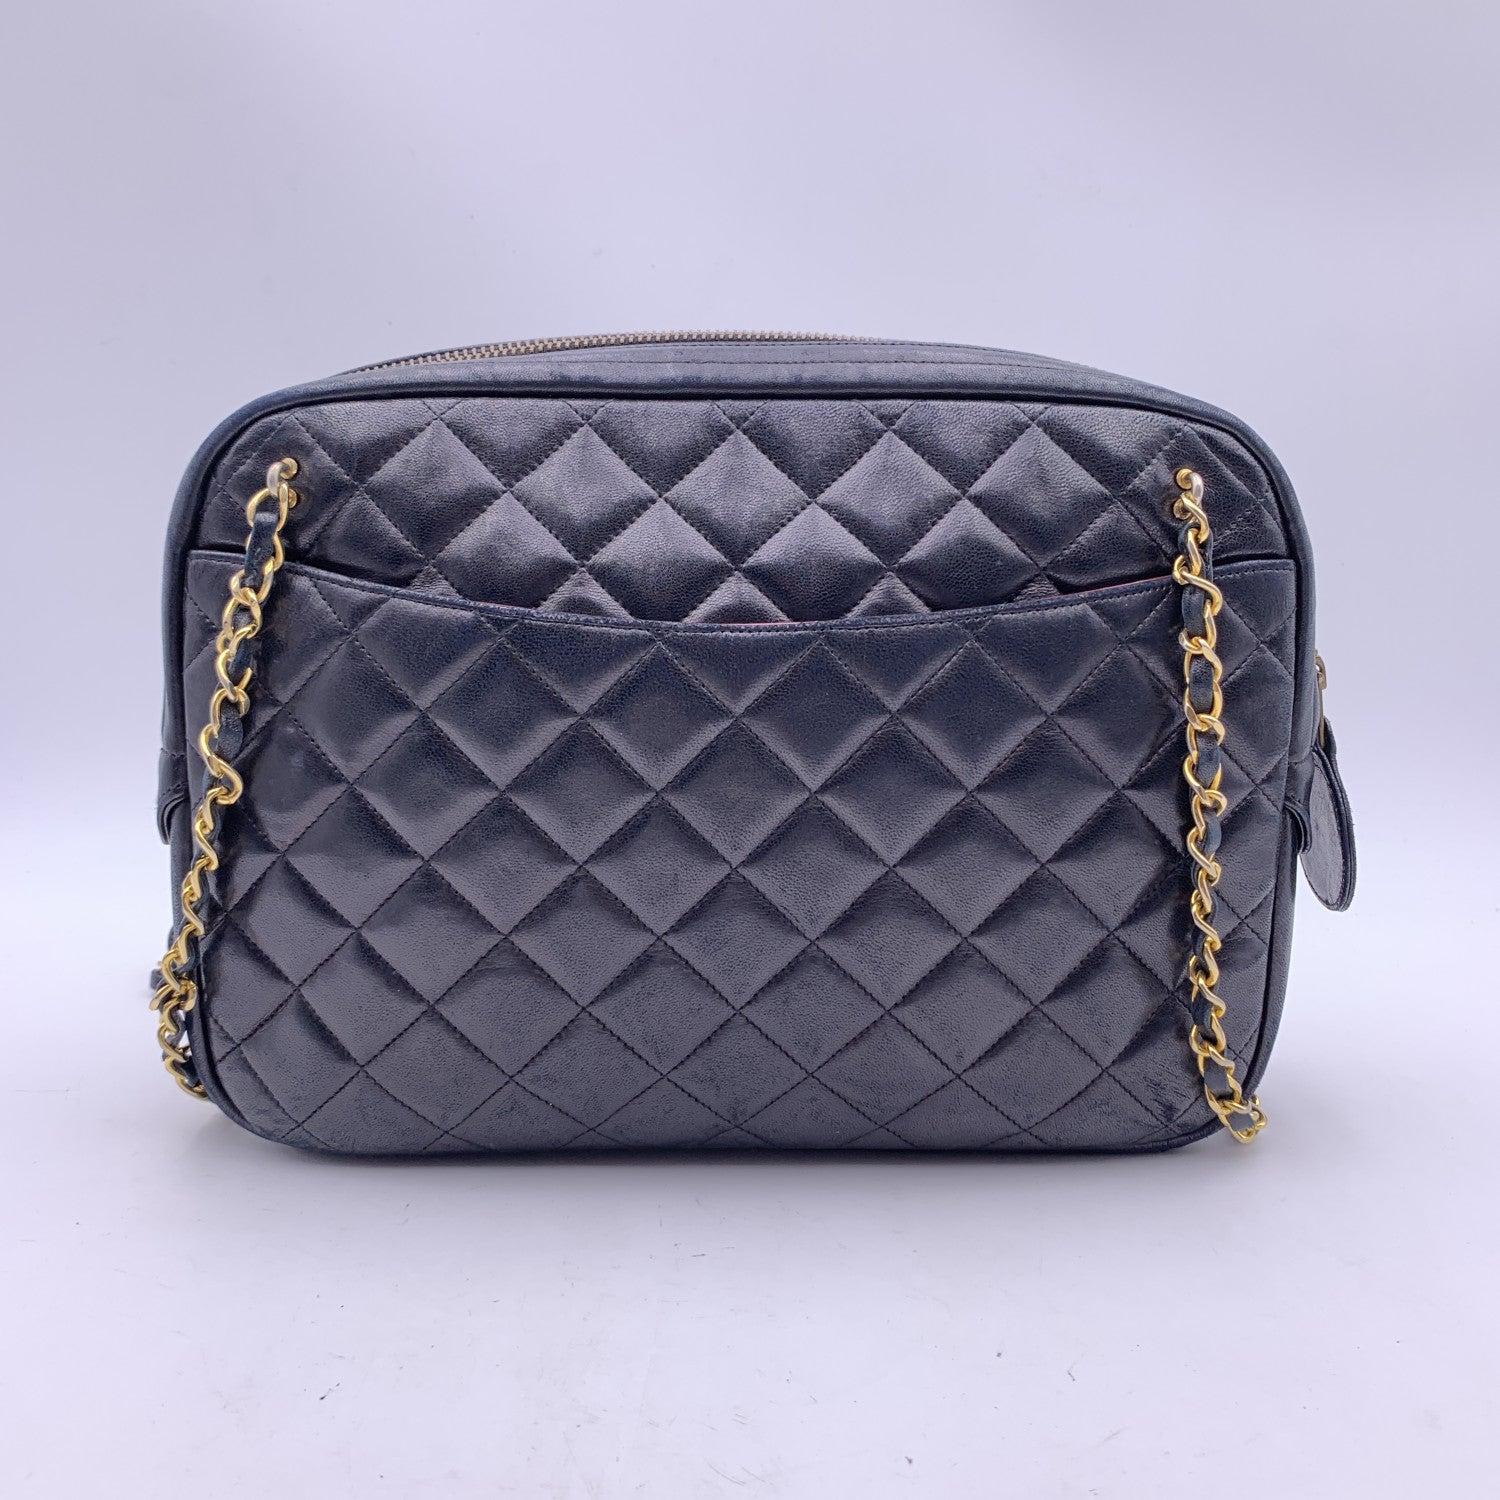 Chanel Vintage Black Quilted Leather Large Camera Shoulder Bag In Good Condition For Sale In Rome, Rome